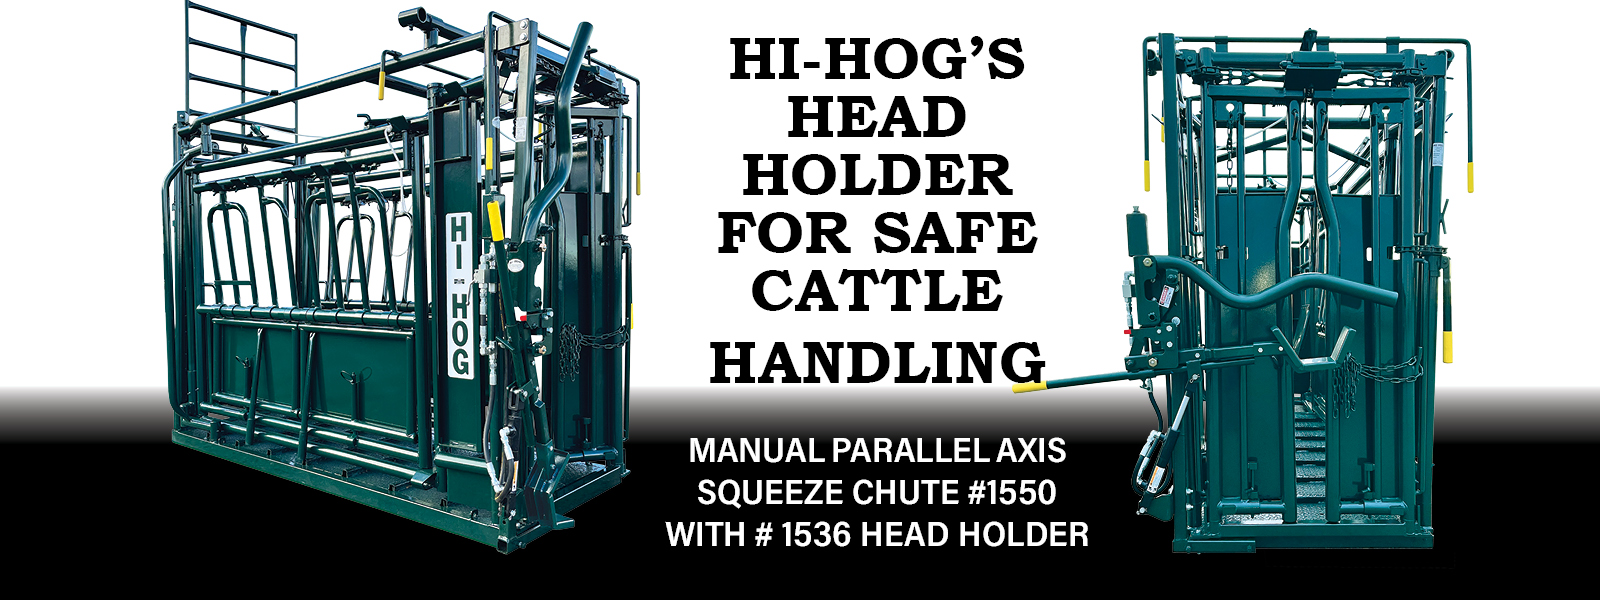 Hi Hog Parallel Axis Squeeze Chutes with 1536 Head Holder Cattle Handling Equipment